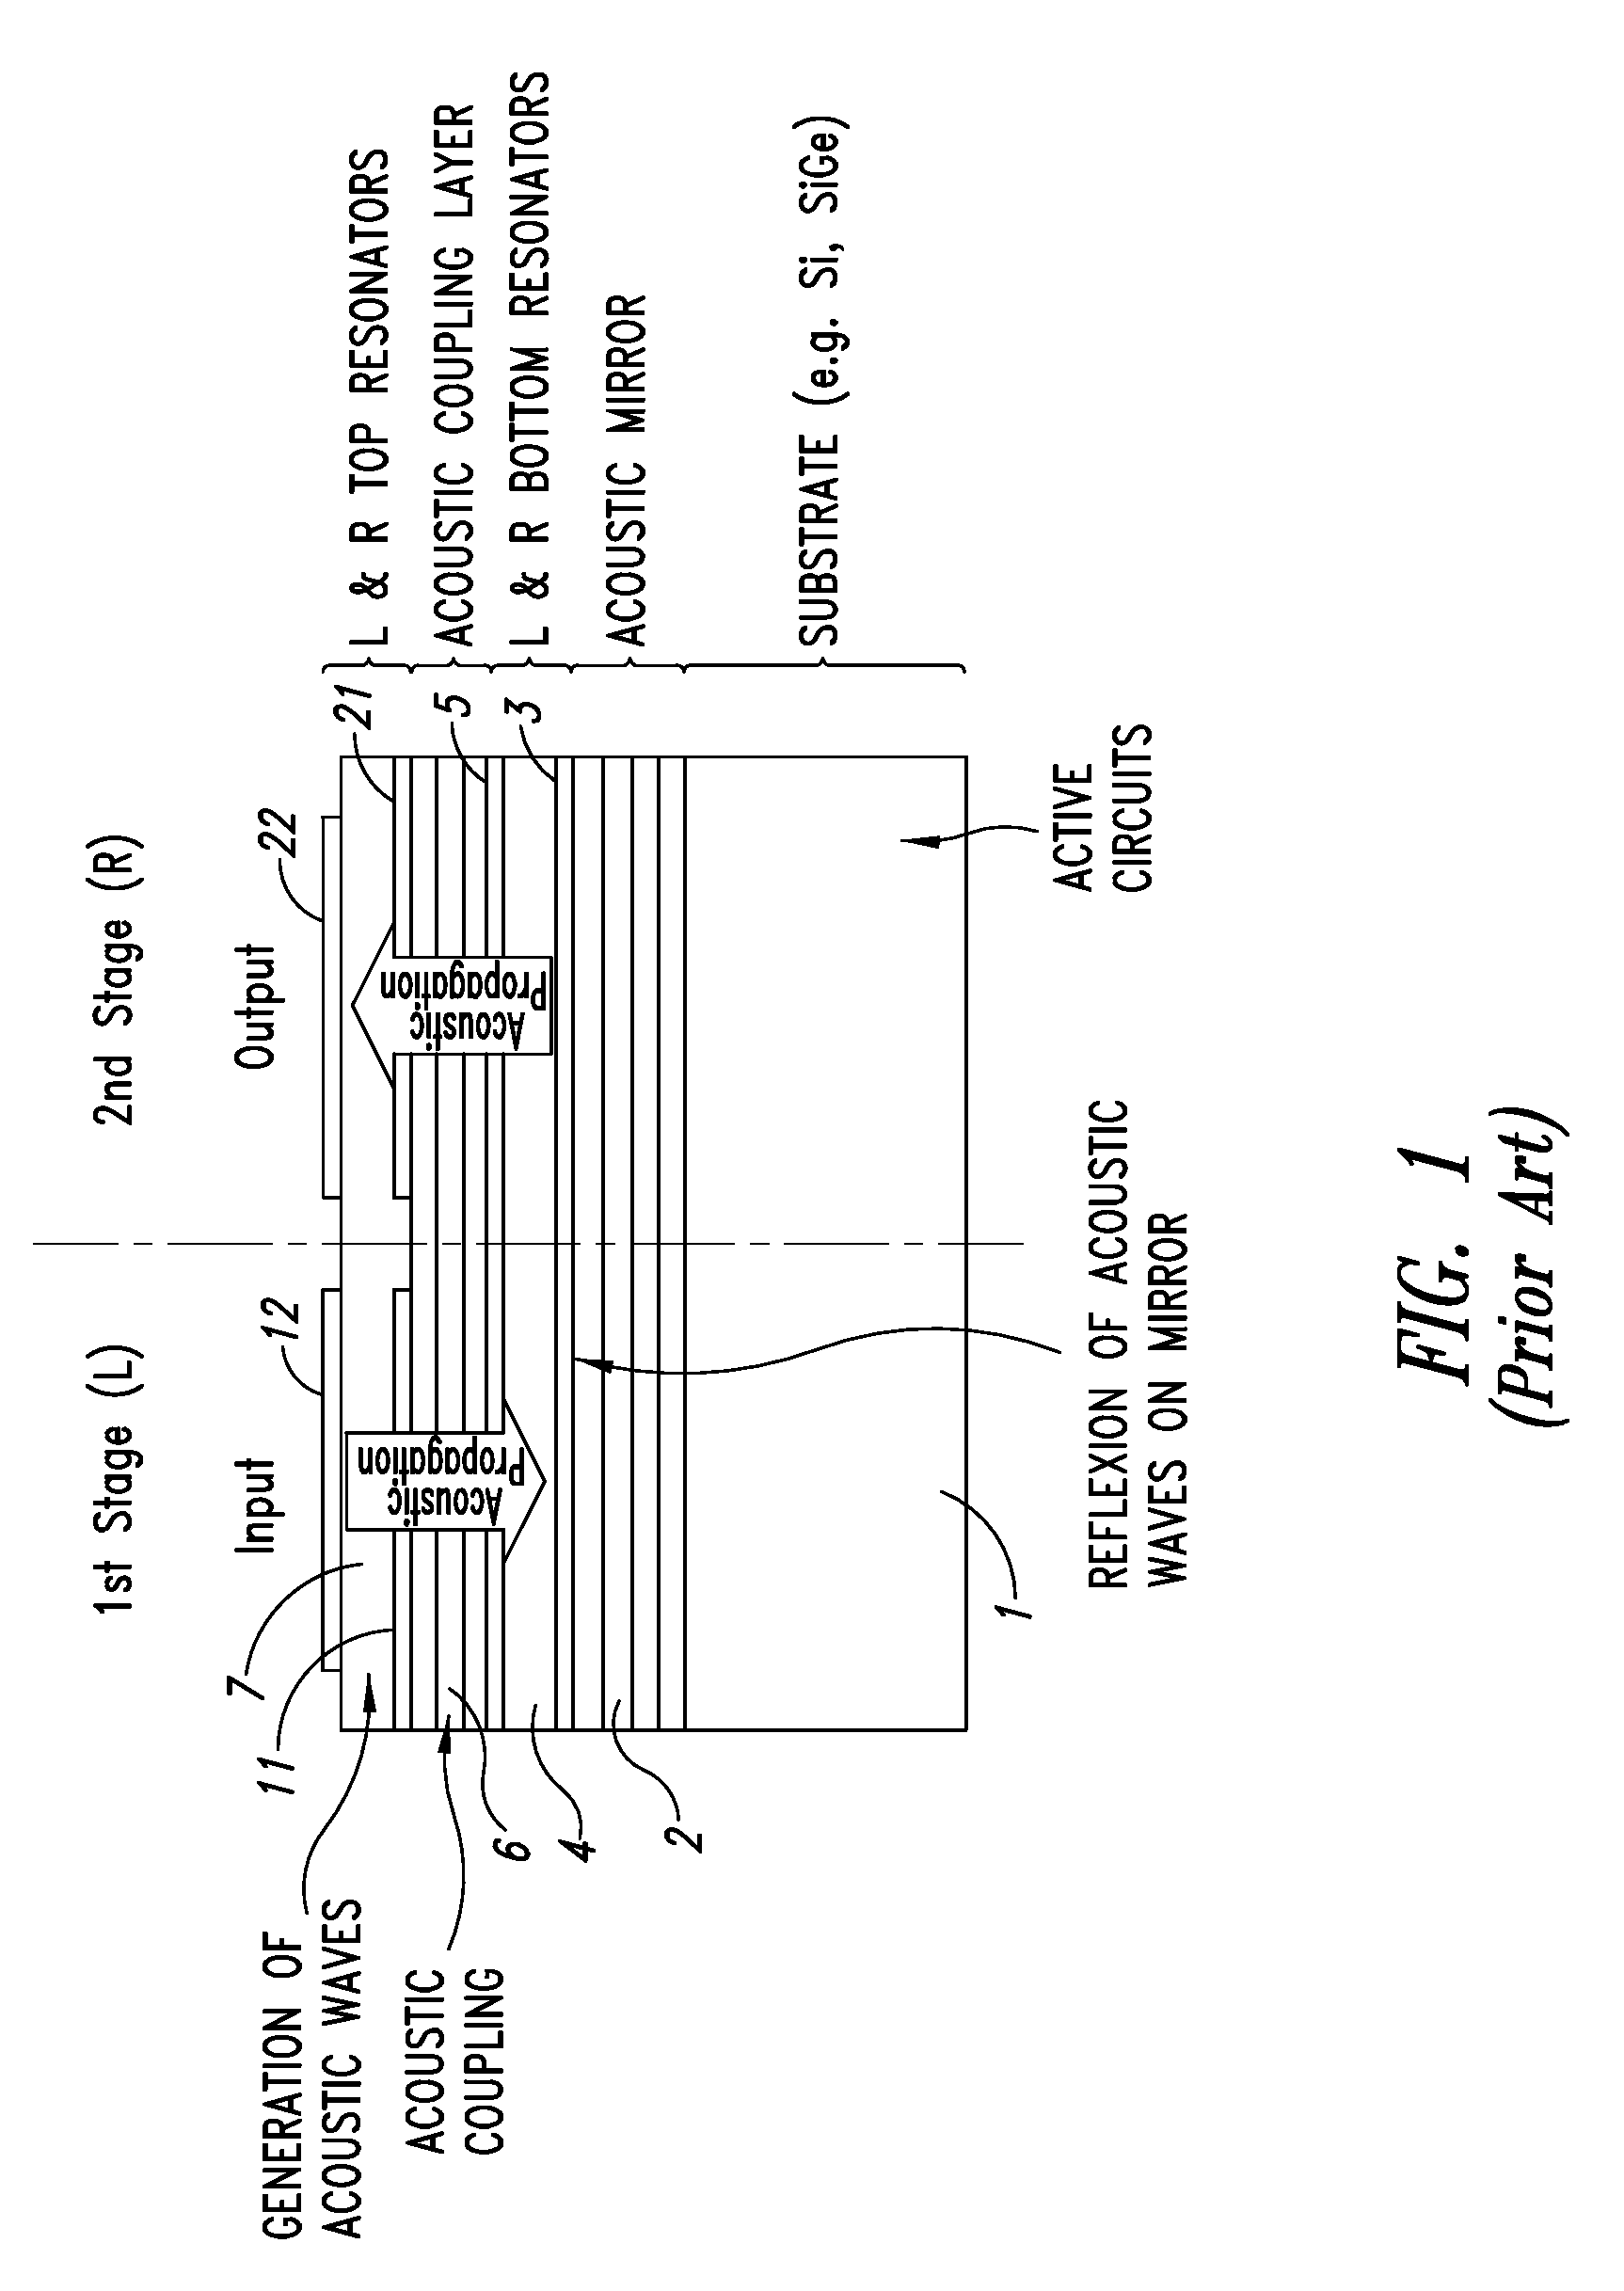 Filtering circuit with coupled acoustic resonators